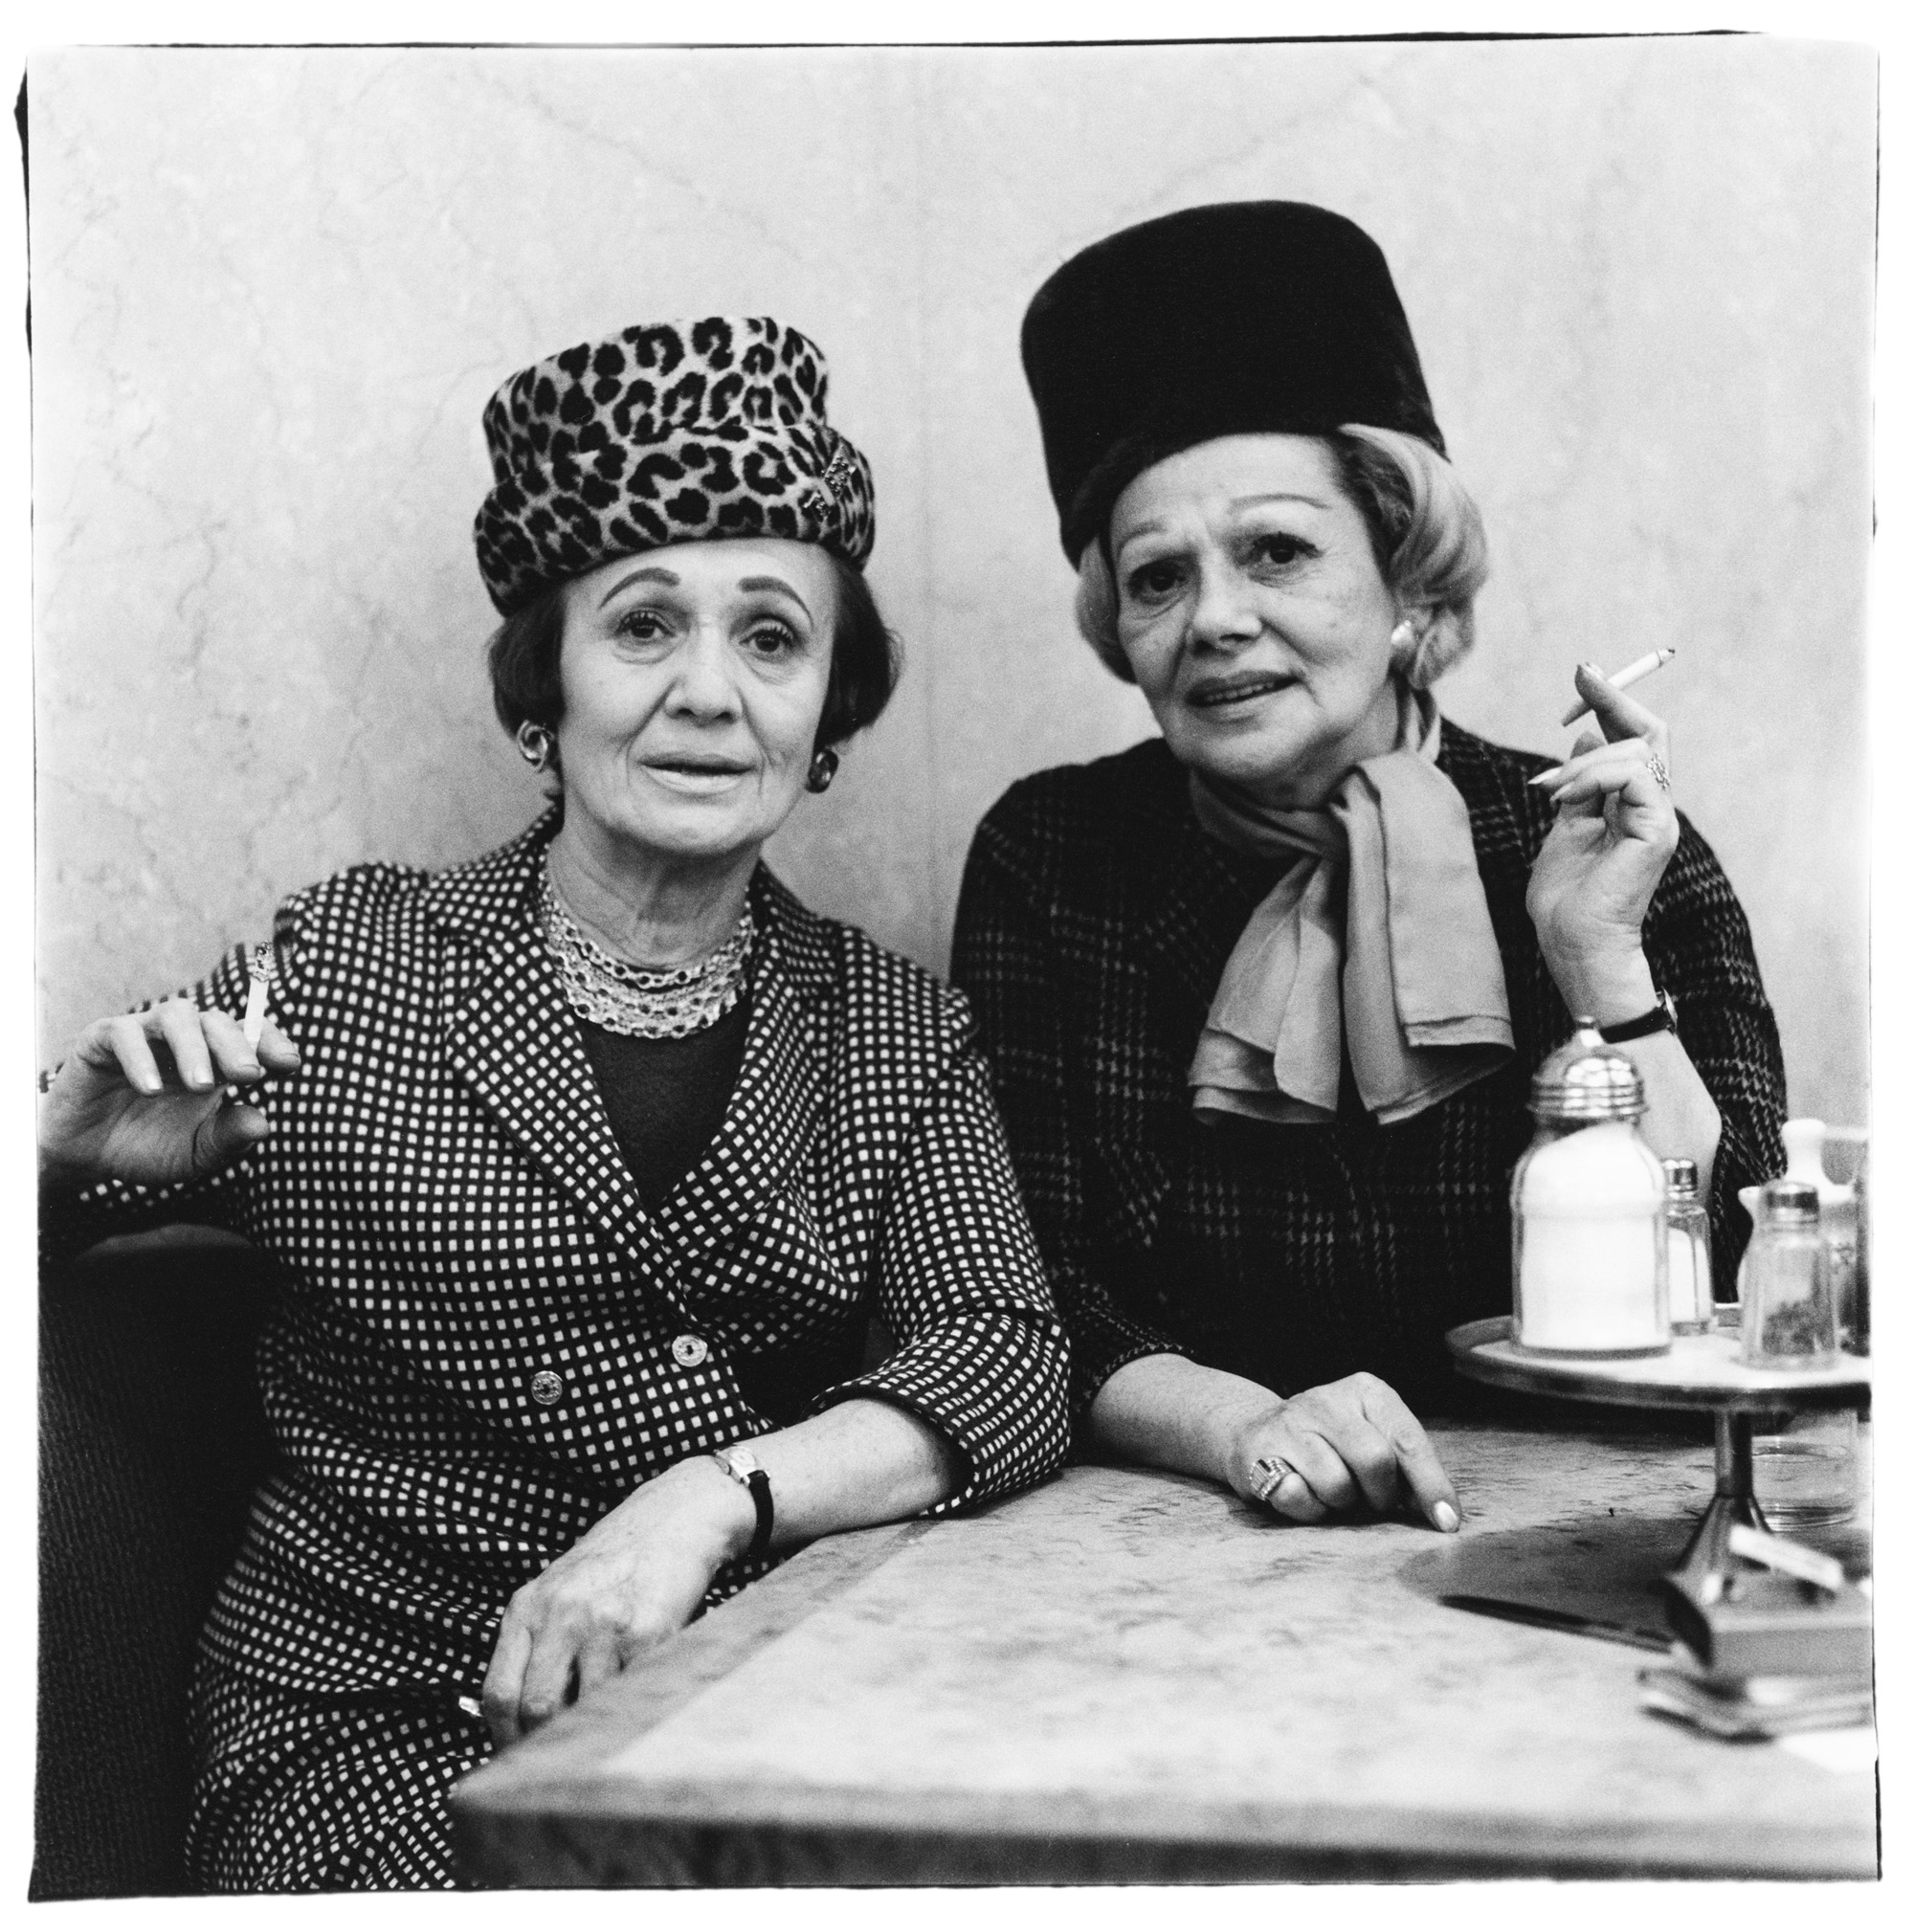 Diane Arbus: Finding Beauty in the Odd